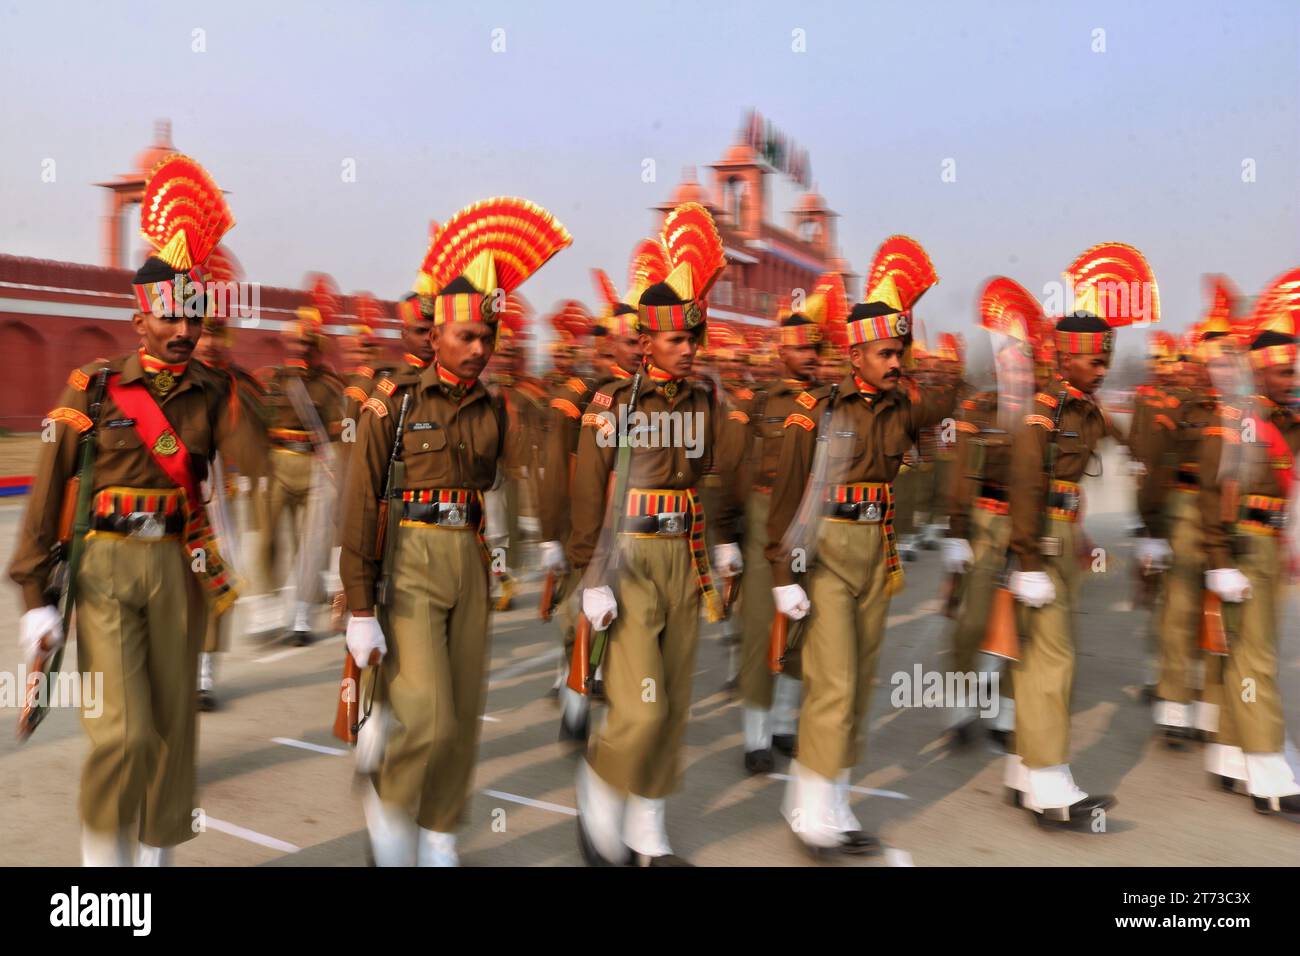 November 09,2023, Srinagar Kashmir, India : New recruits of the Indian Border Security Force (BSF) march as they take part during a passing out parade in Humhama, on the outskirts of Srinagar. A total of 599 recruits were formally inducted into the BSF, an Indian paramilitary force, after completing 44 weeks of training in physical fitness, weapon handling, commando operations and counter insurgency, a BSF spokesman said. On November 09,2023, Srinagar Kashmir, India. (Photo By Firdous Nazir/Eyepix Group/Sipa USA) Stock Photo